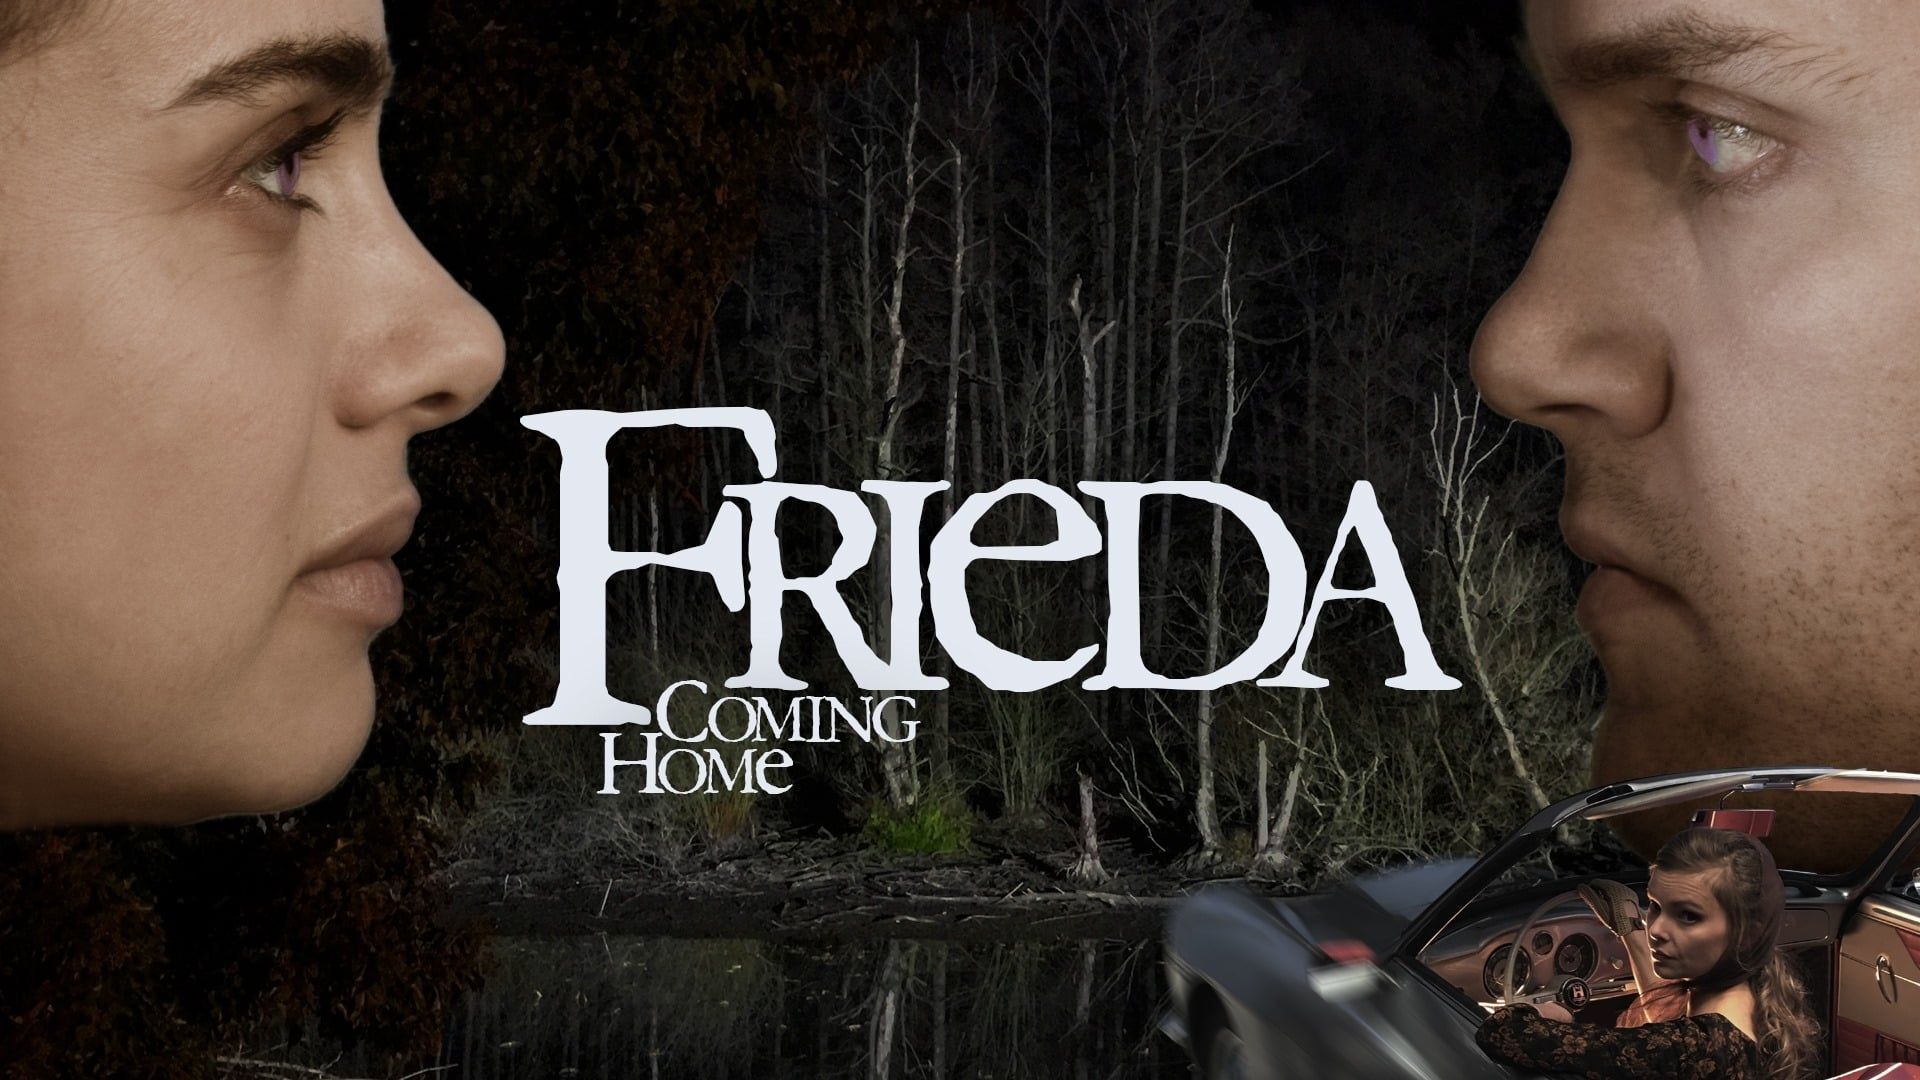 Frieda: Coming Home background